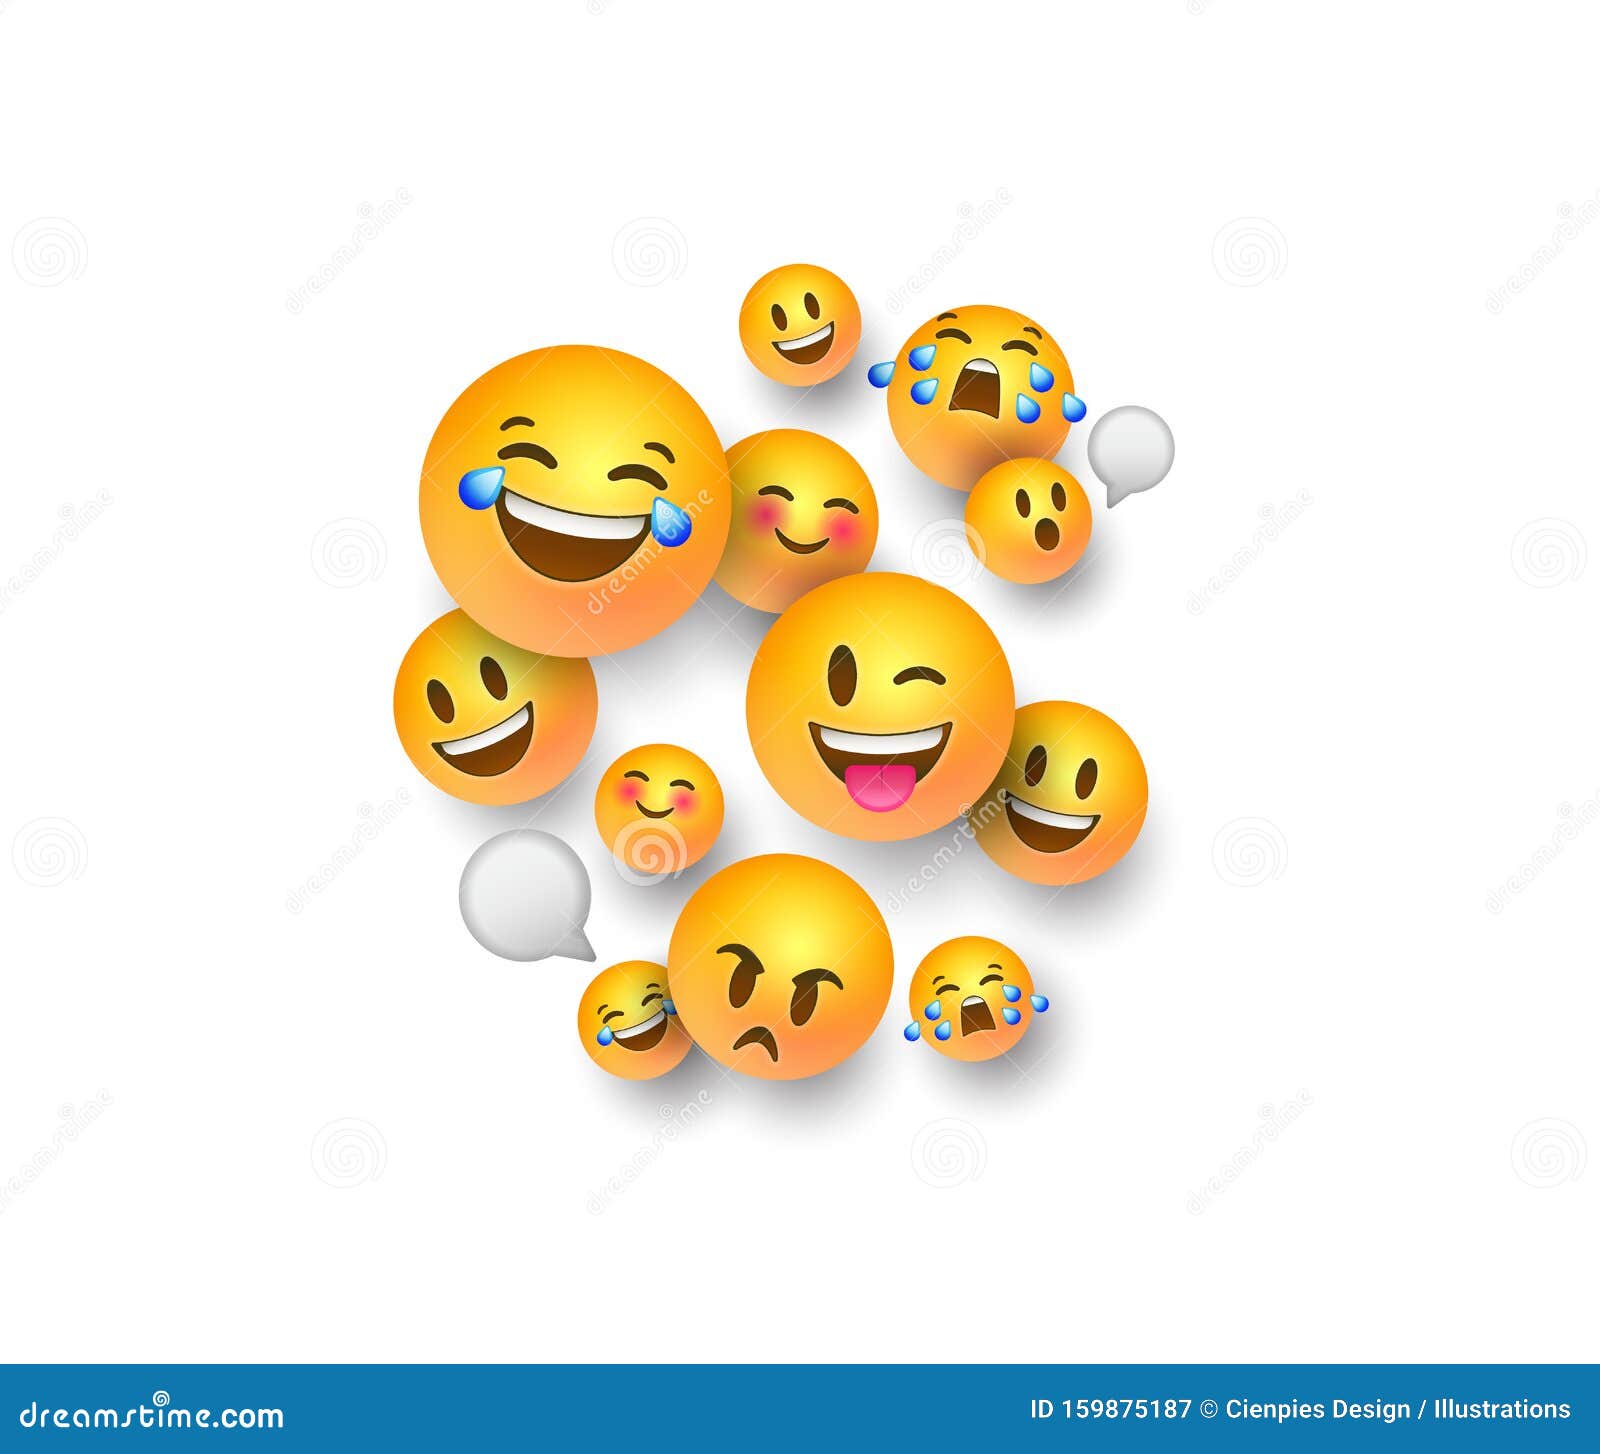 Funny 3d Emoji Face Icons on White Background Stock Vector - Illustration  of circle, expression: 159875187